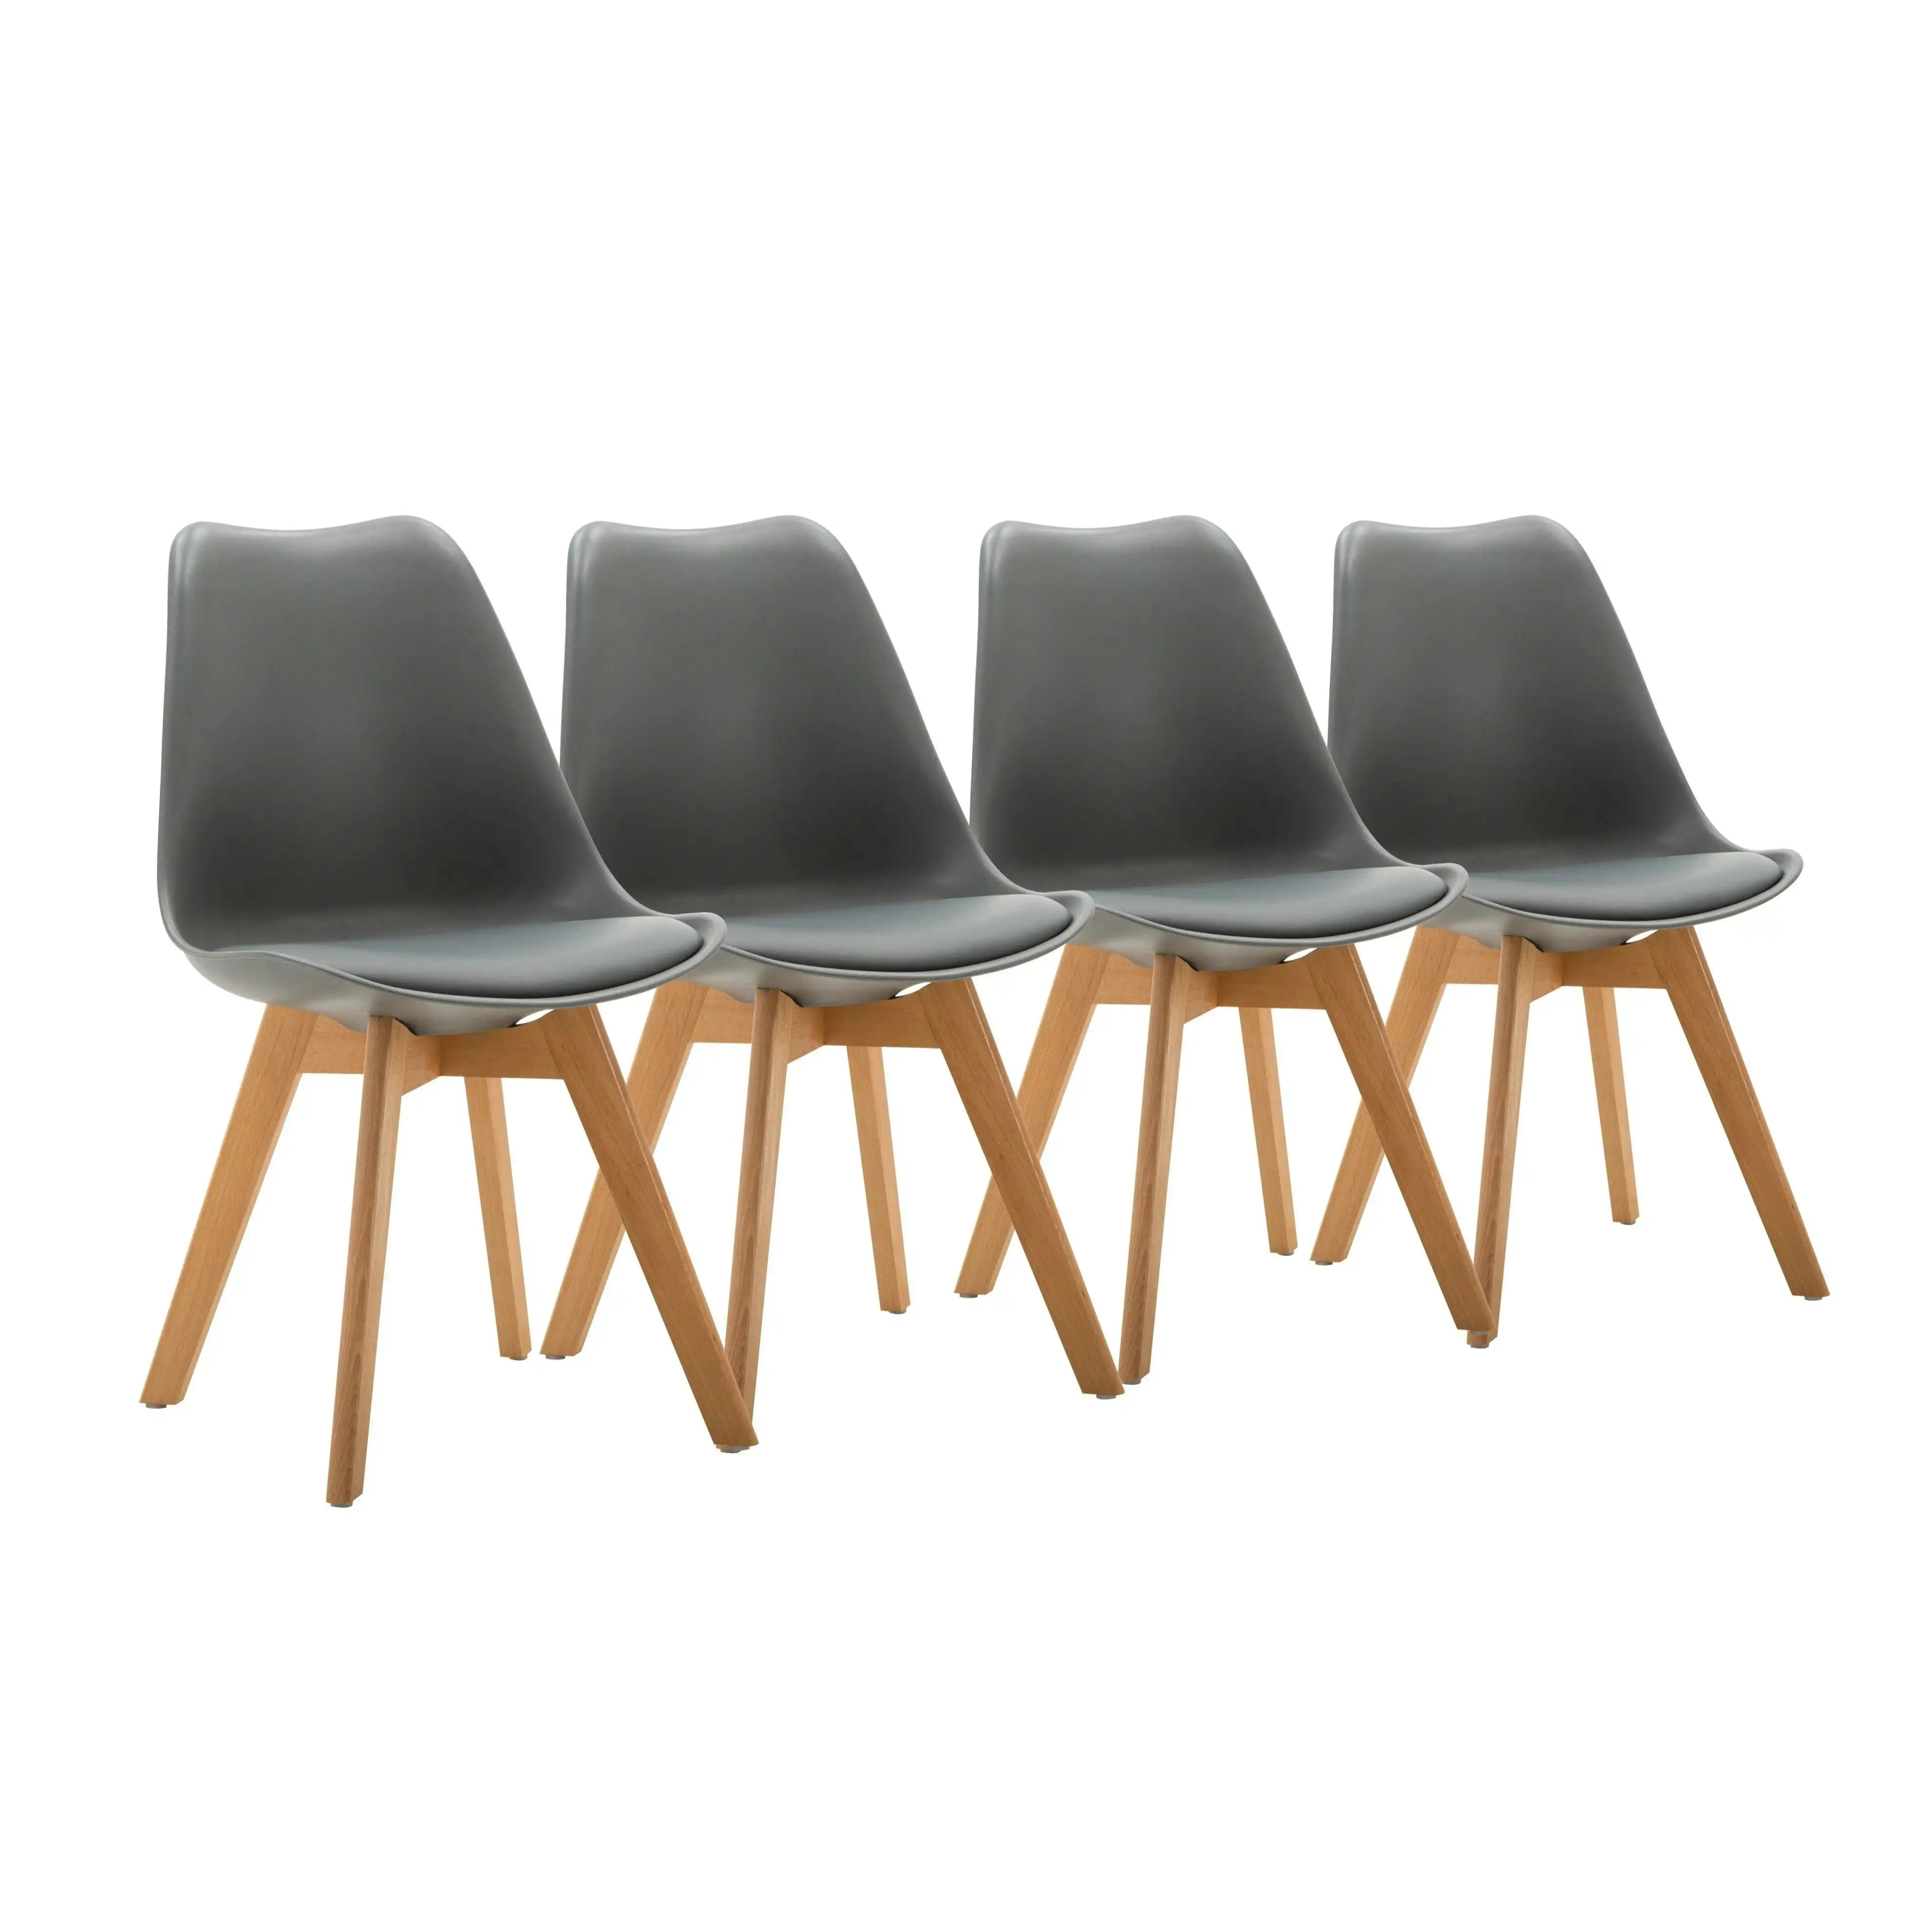 Chotto - Ando Dining Chairs - Grey x 4